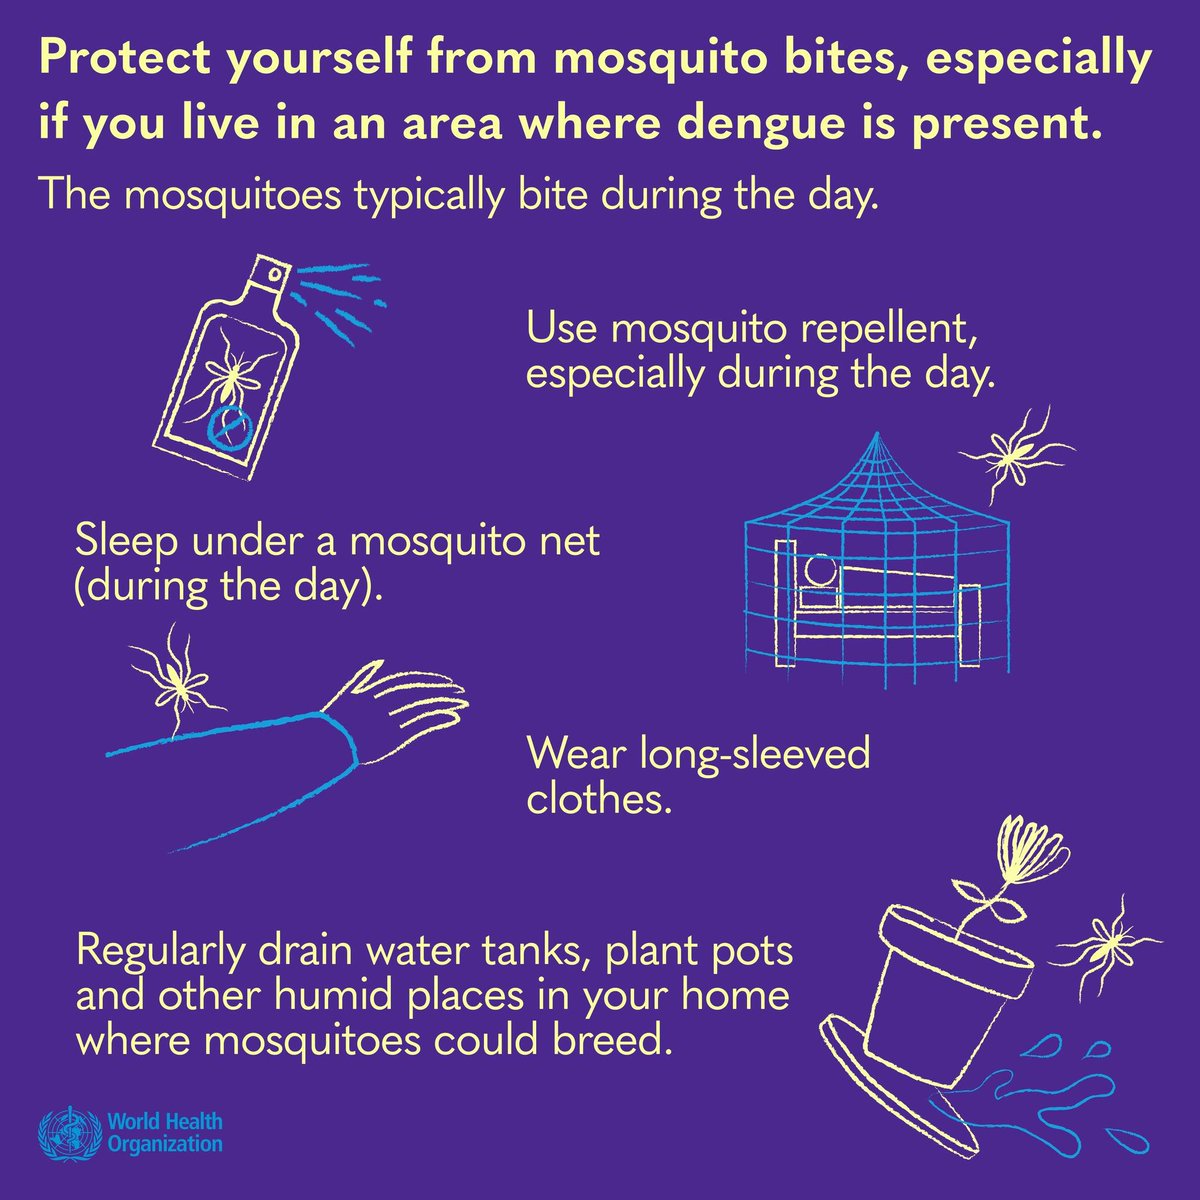 Infected #dengue mosquitoes are active during the day ☀️ You can lower the risk by using: ✅ mosquito repellents ✅ long-sleeved clothes ✅ mosquito nets when sleeping during the day ✅ window screens Remember to often drain, wash & scrub water storage containers.